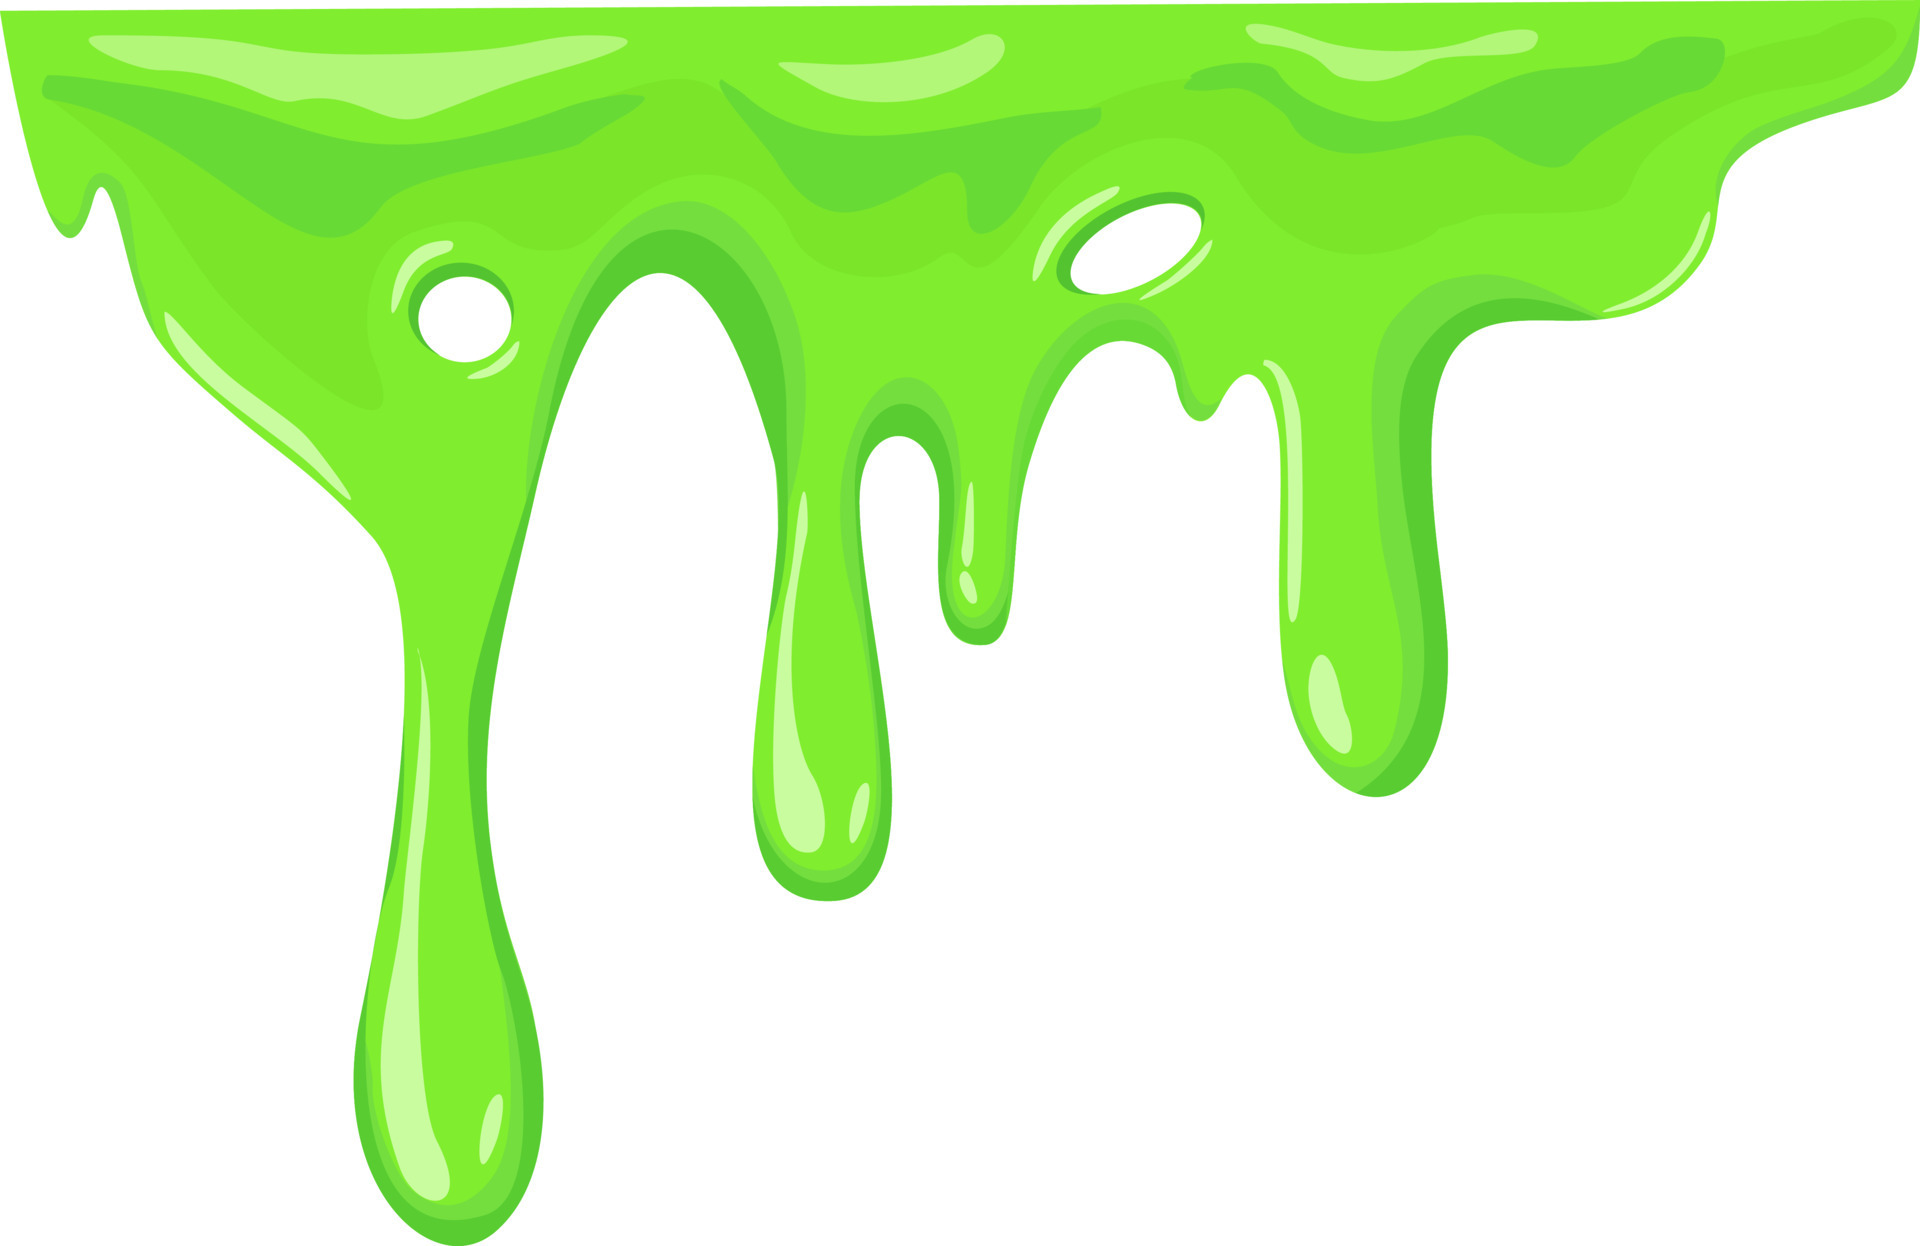 Green slime drip isolated on transparent Vector Image